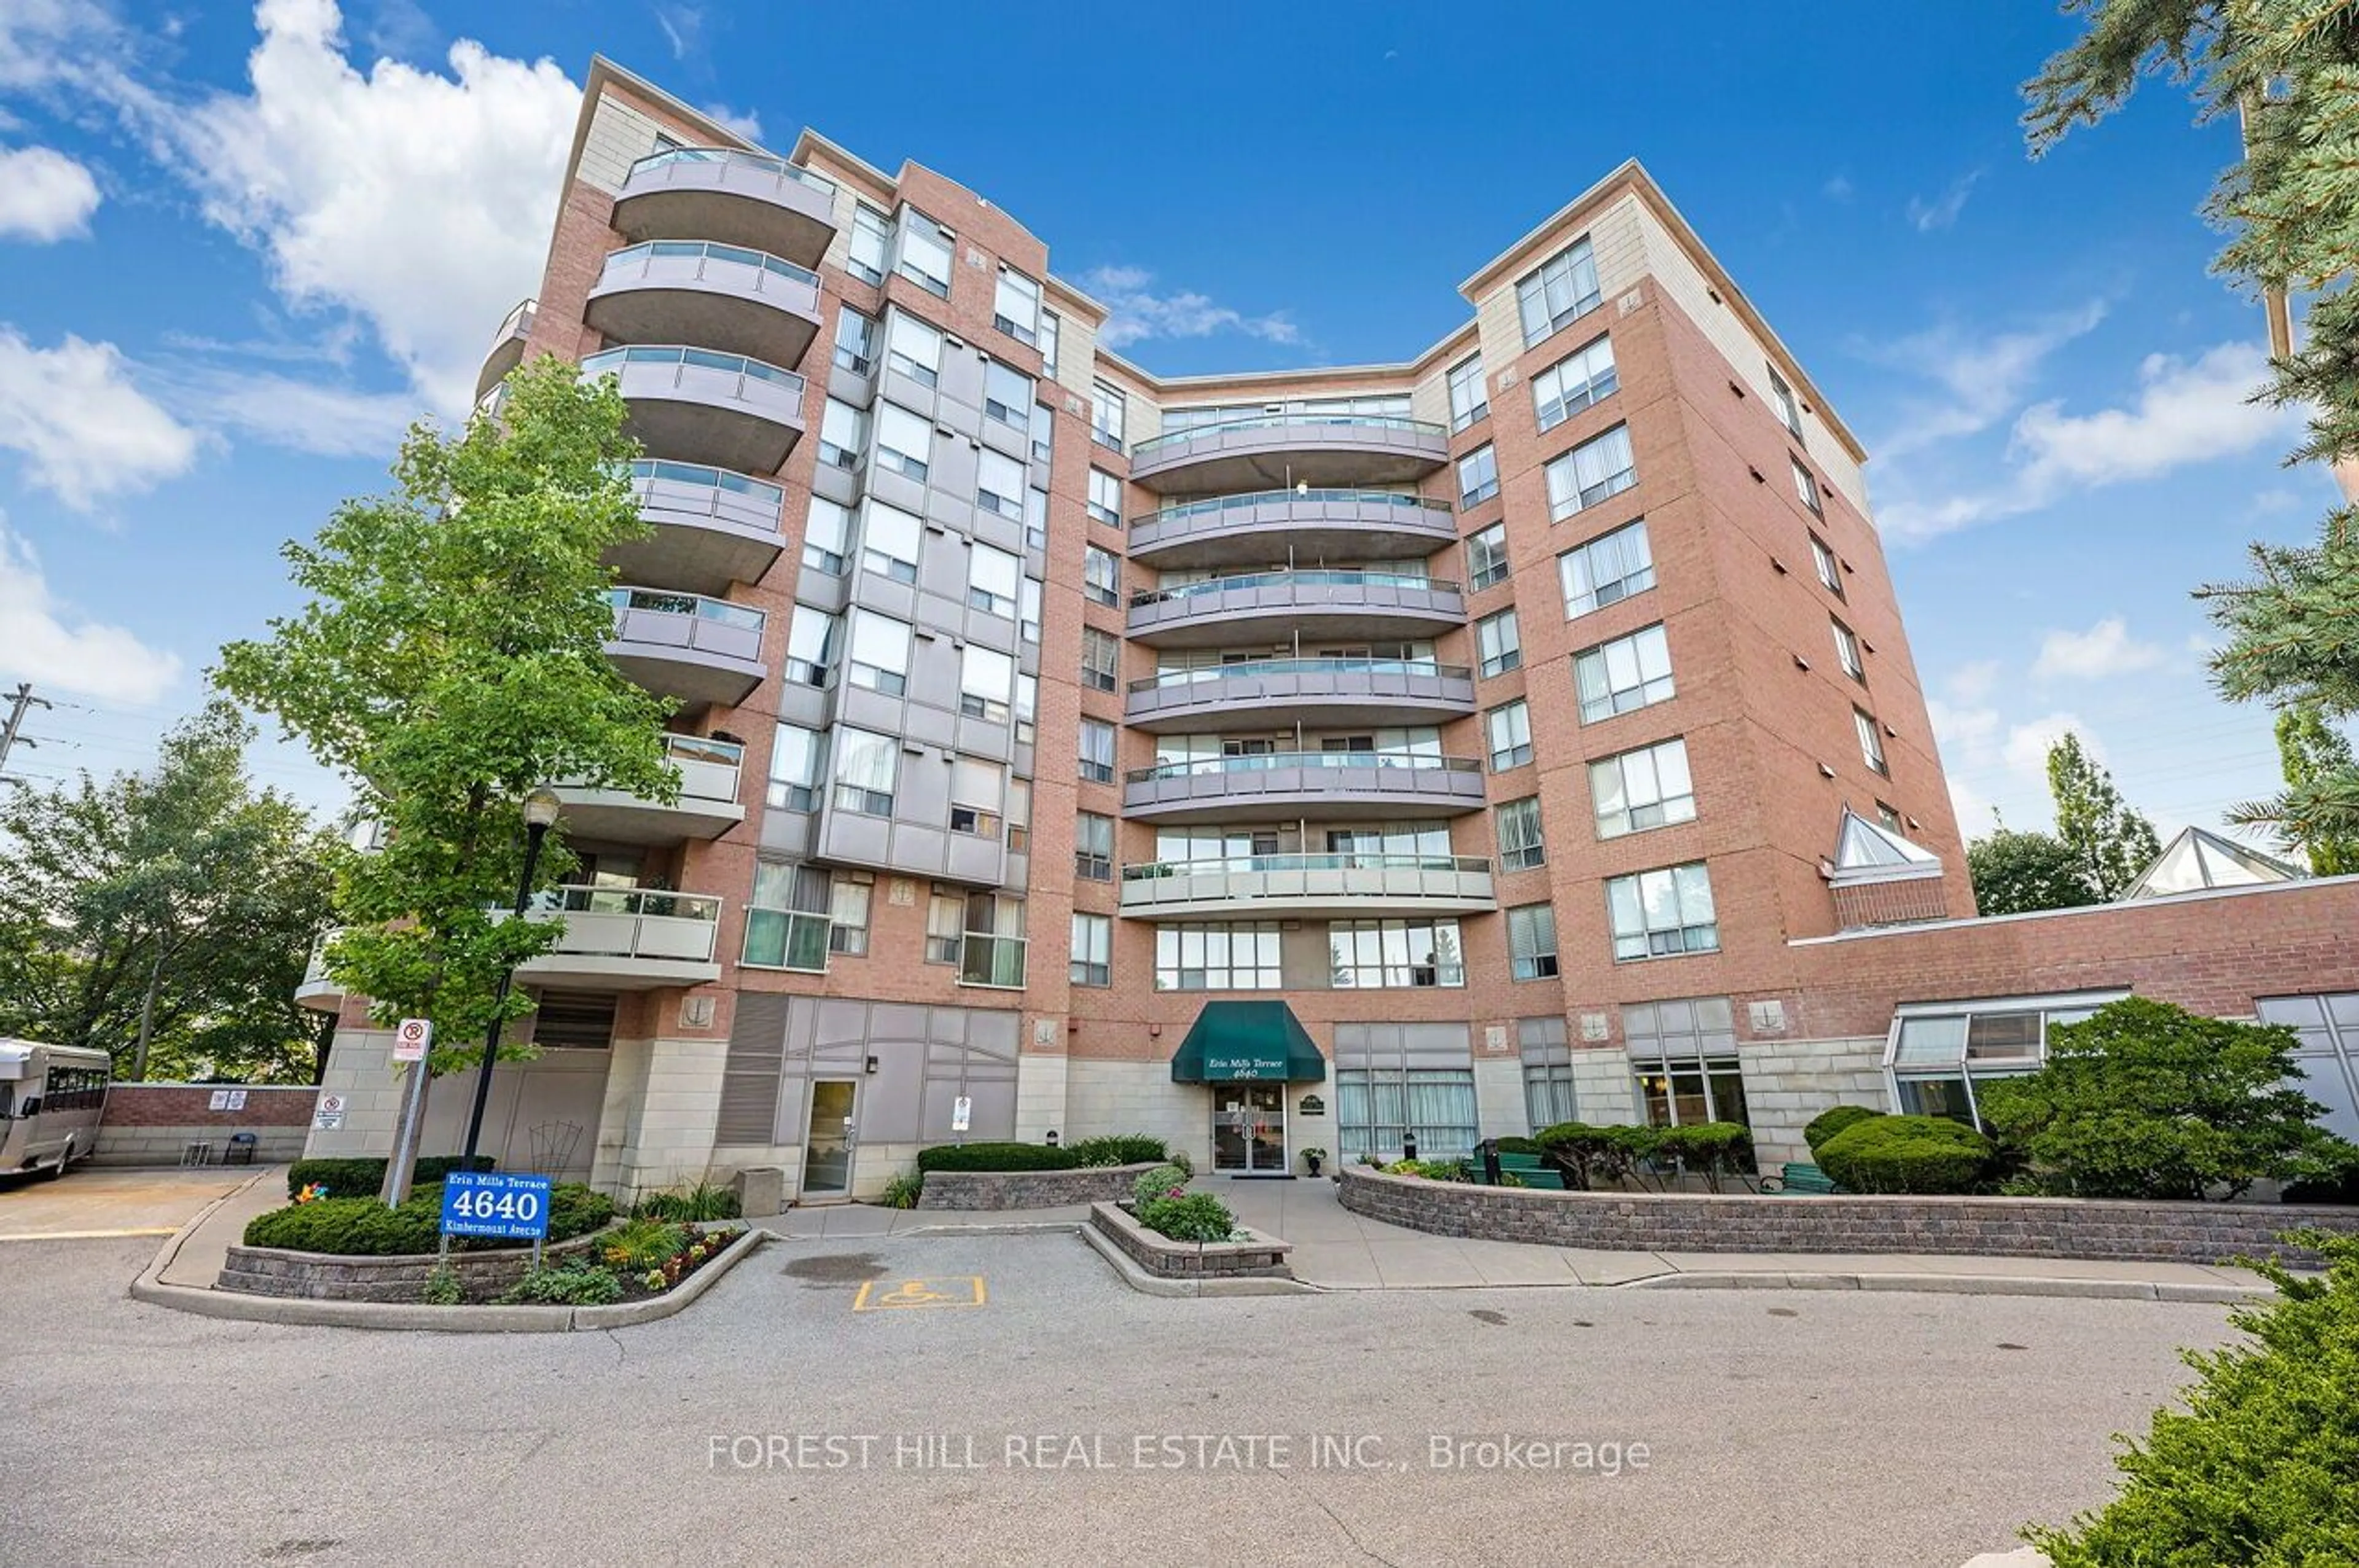 A pic from exterior of the house or condo for 4640 Kimbermount Ave #407, Mississauga Ontario L5M 5W6